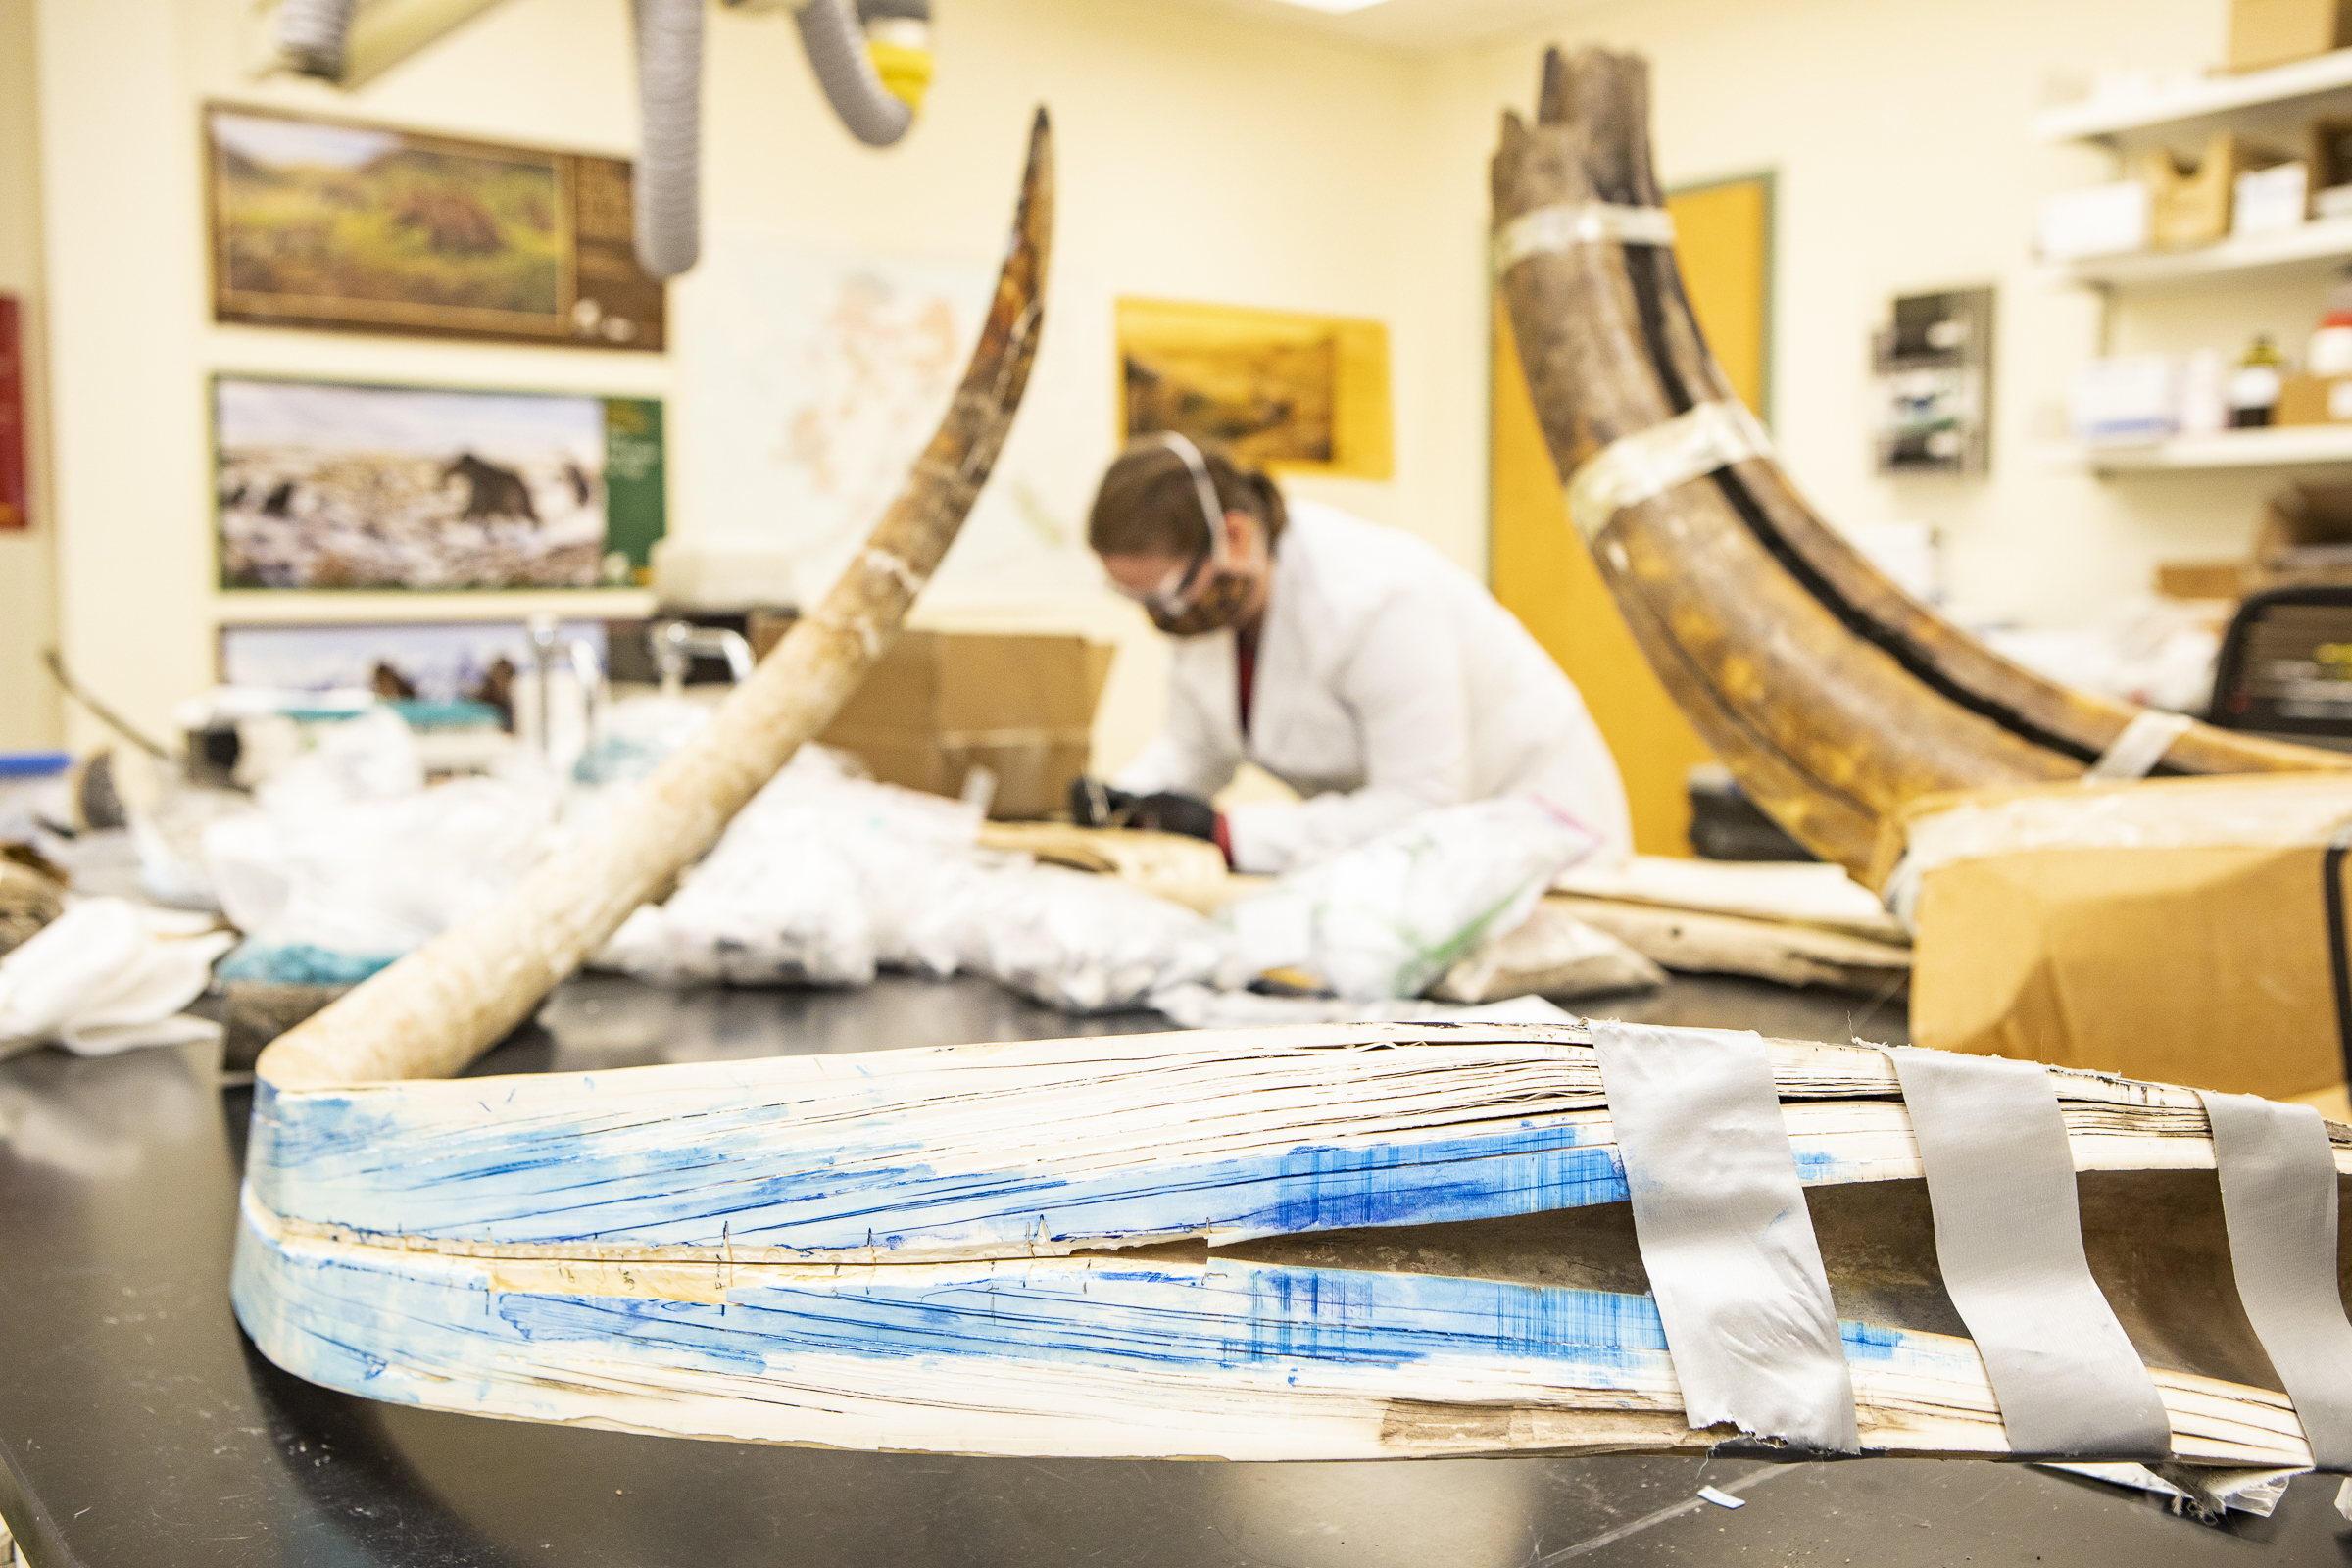 A view of a split mammoth tusk at the Alaska Stable Isotope Facility at the University of Alaska Fairbanks